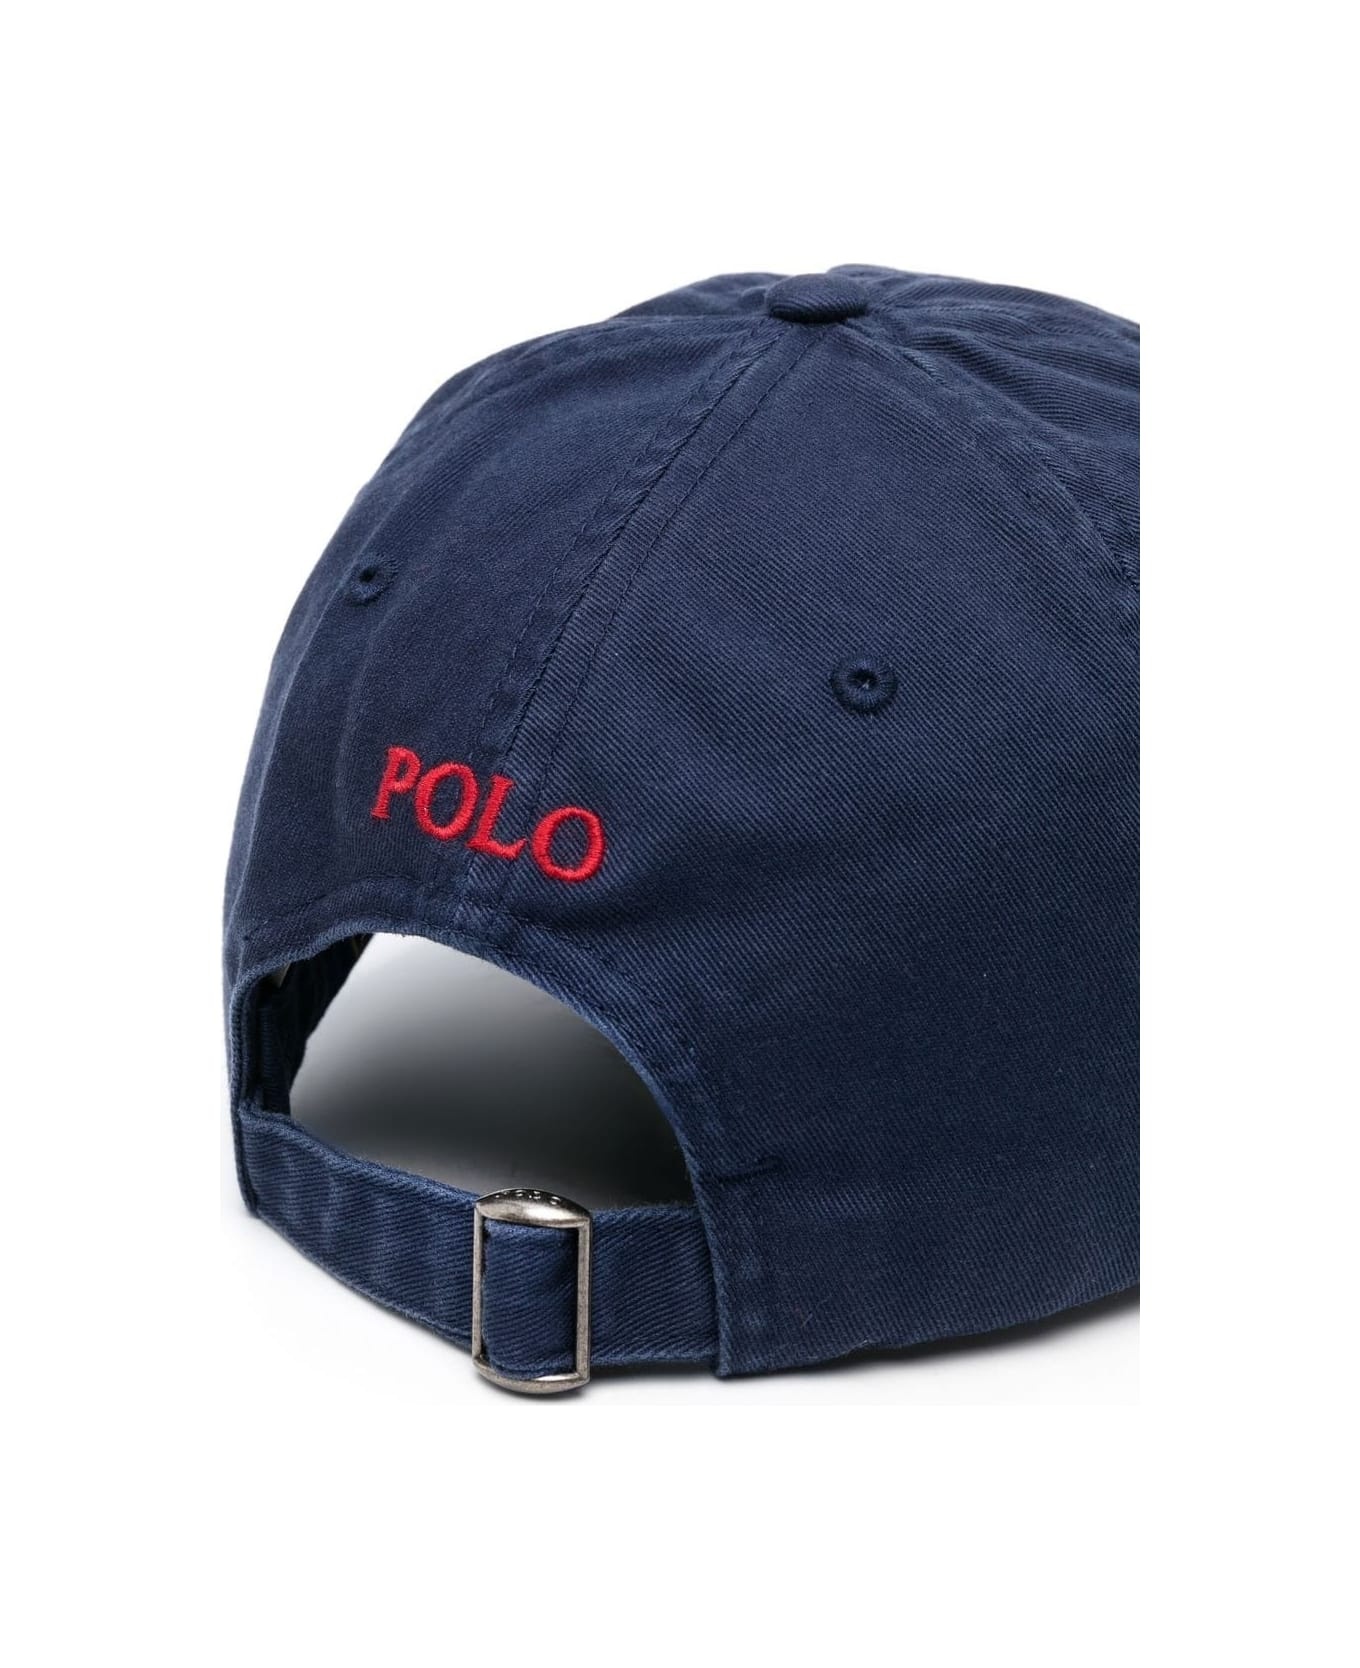 Night Blue Baseball Hat With Red Pony - 2